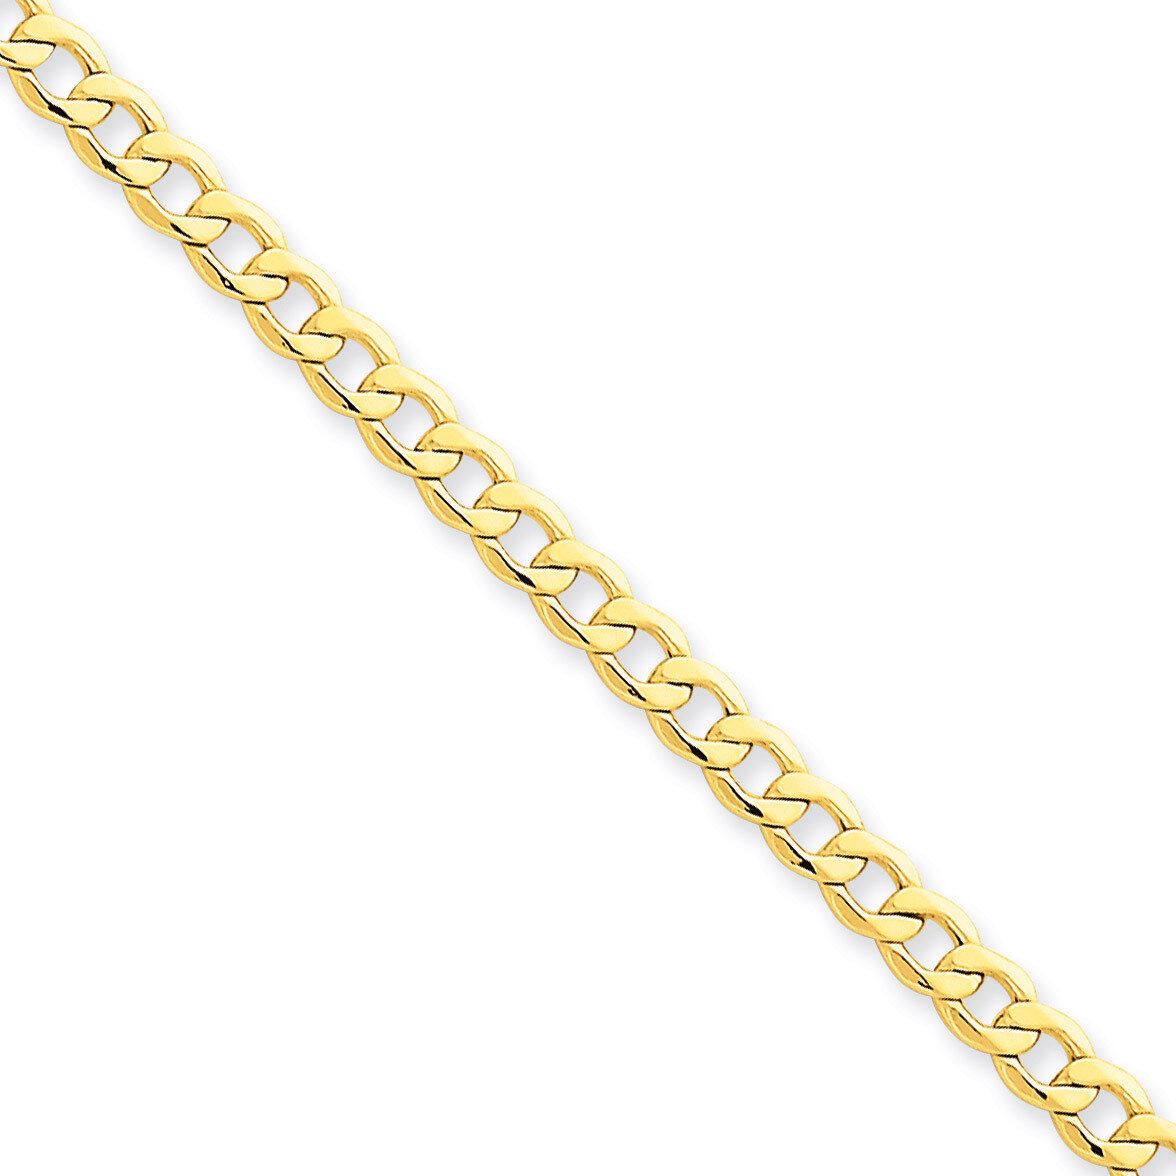 4.3mm Semi-Solid Curb Link Chain 24 Inch 14k Gold BC107-24